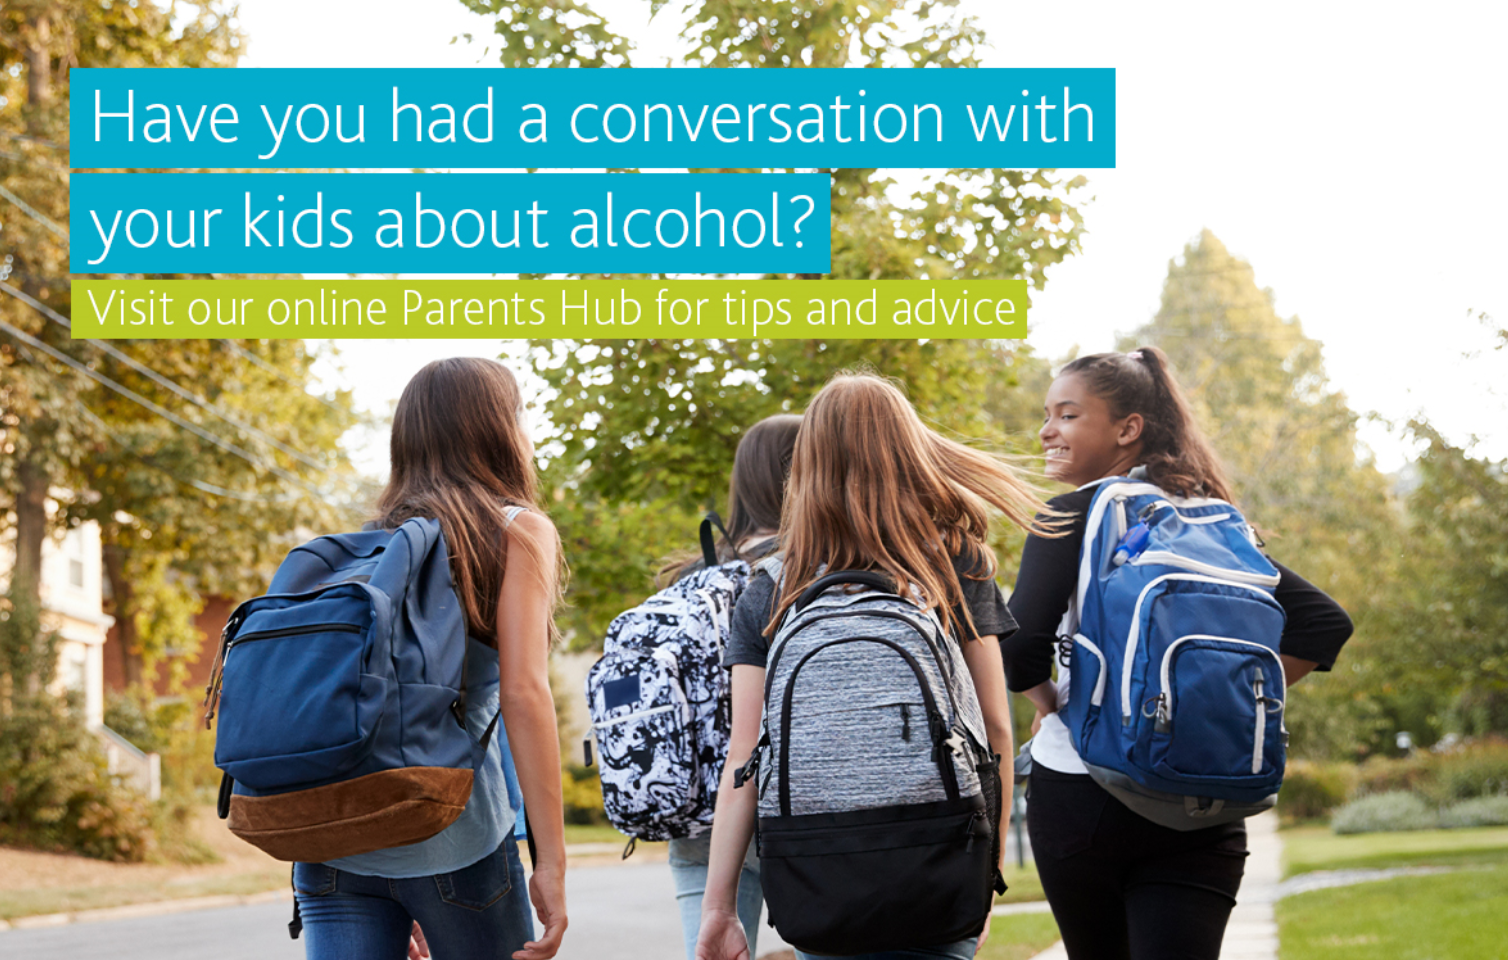 Text reads have you had a conversation with your teen about alcohol. Image is 4 young people walking